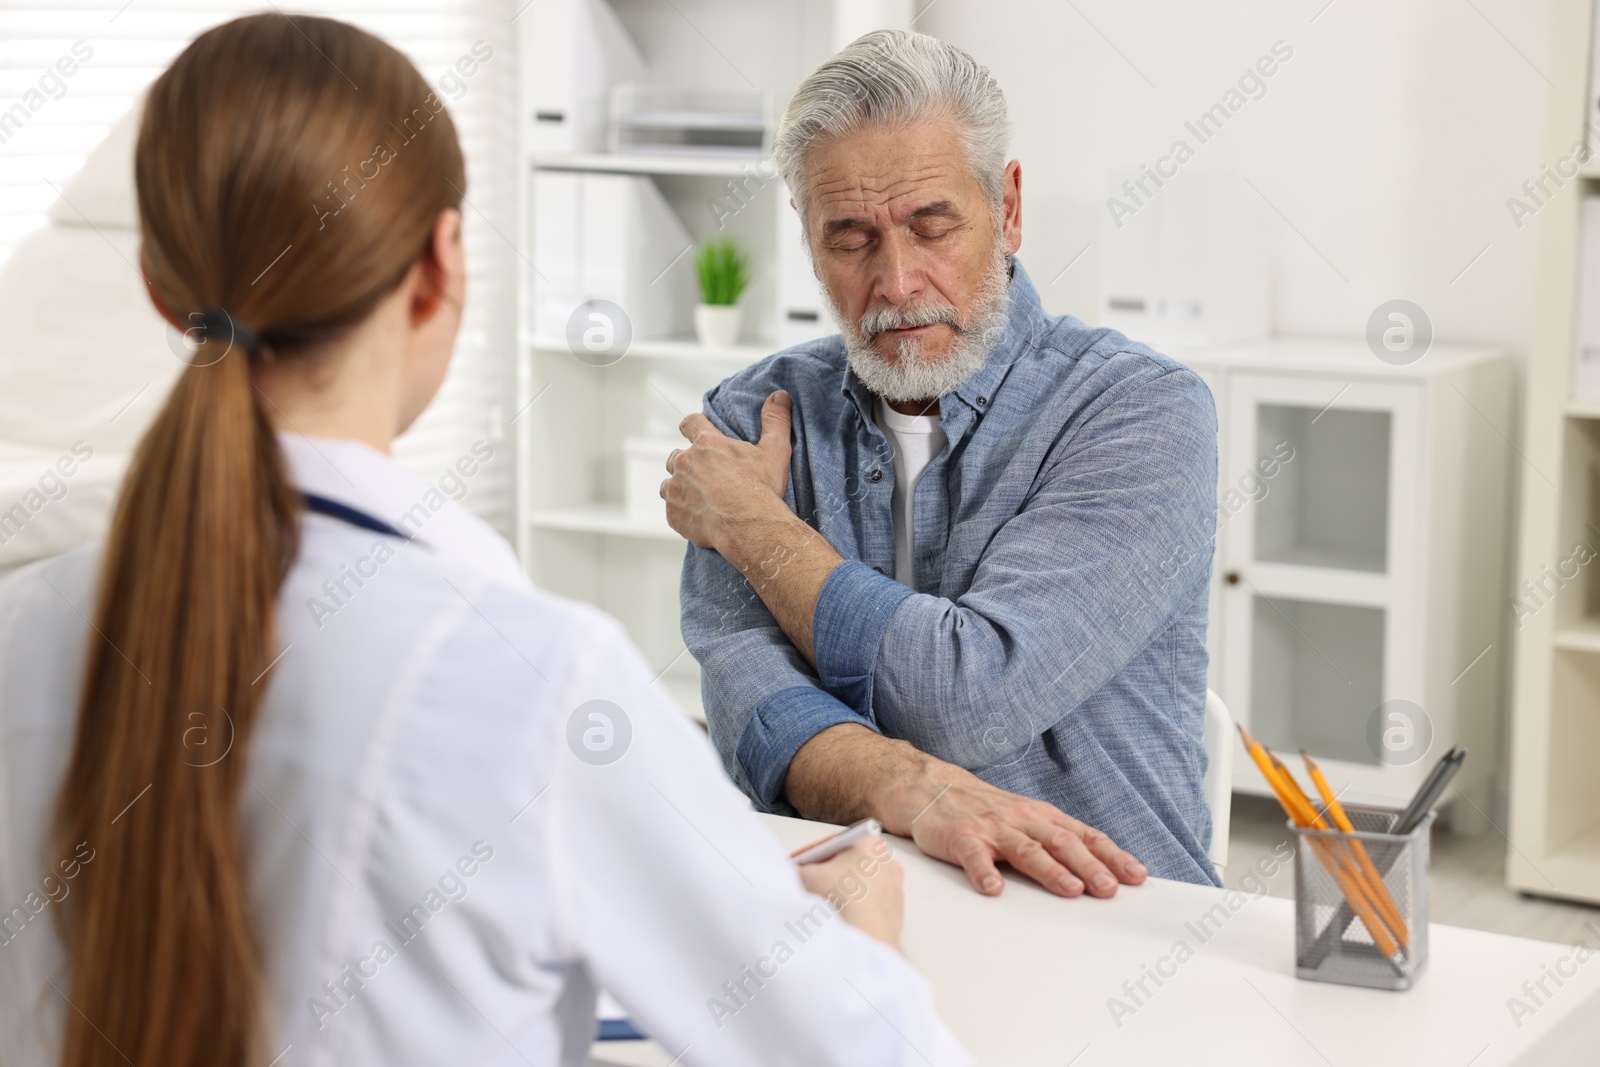 Photo of Arthritis symptoms. Doctor consulting patient with shoulder pain in hospital